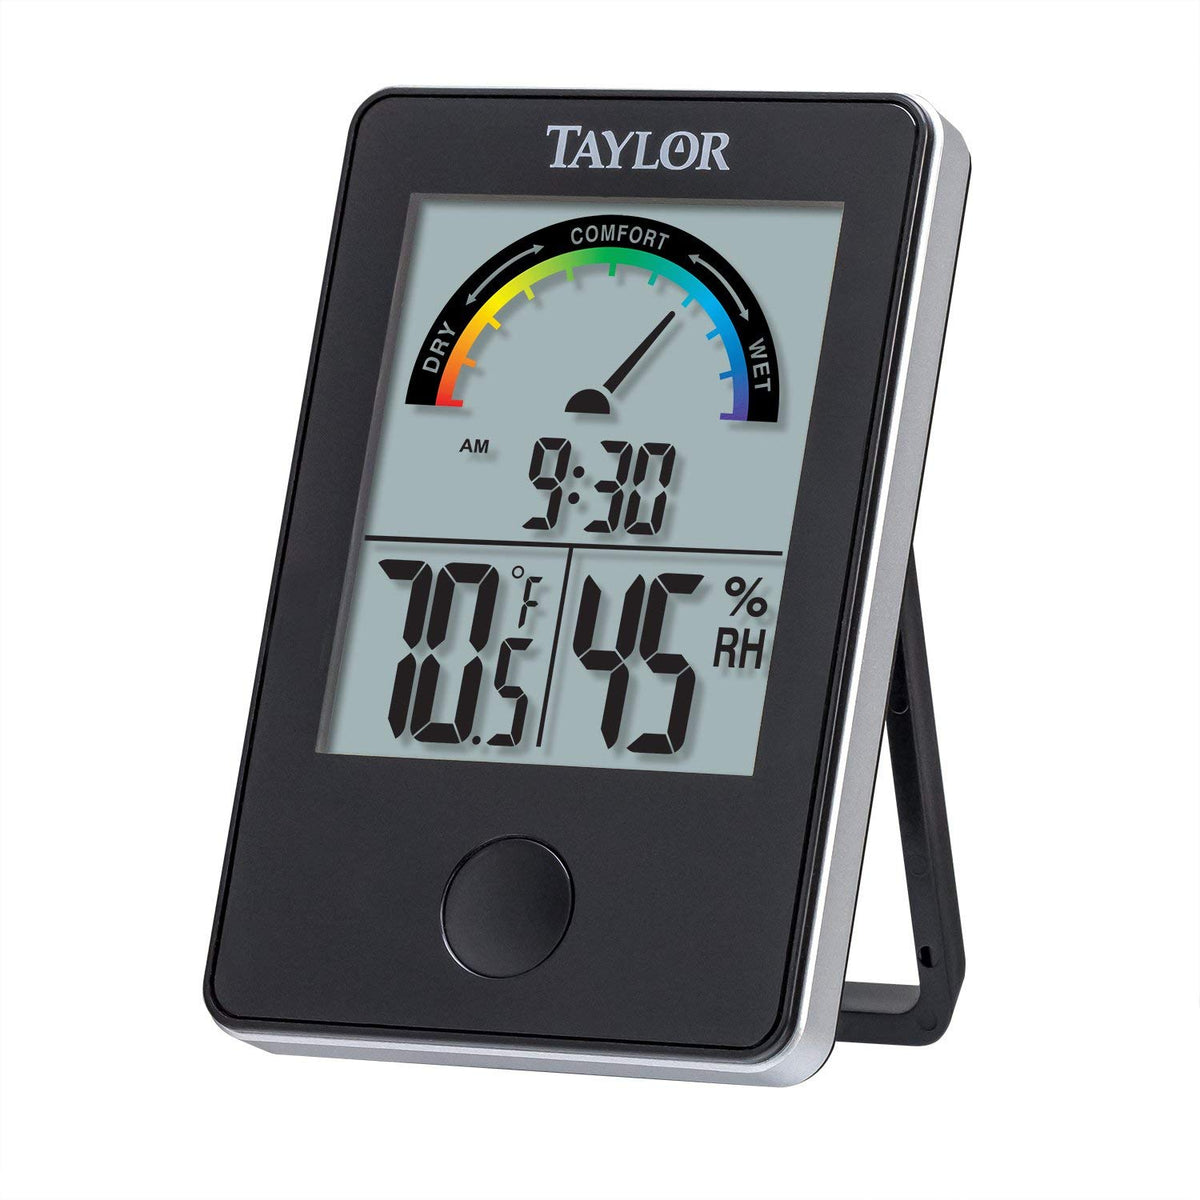 buy outdoor thermometers at cheap rate in bulk. wholesale & retail outdoor furniture & grills store.